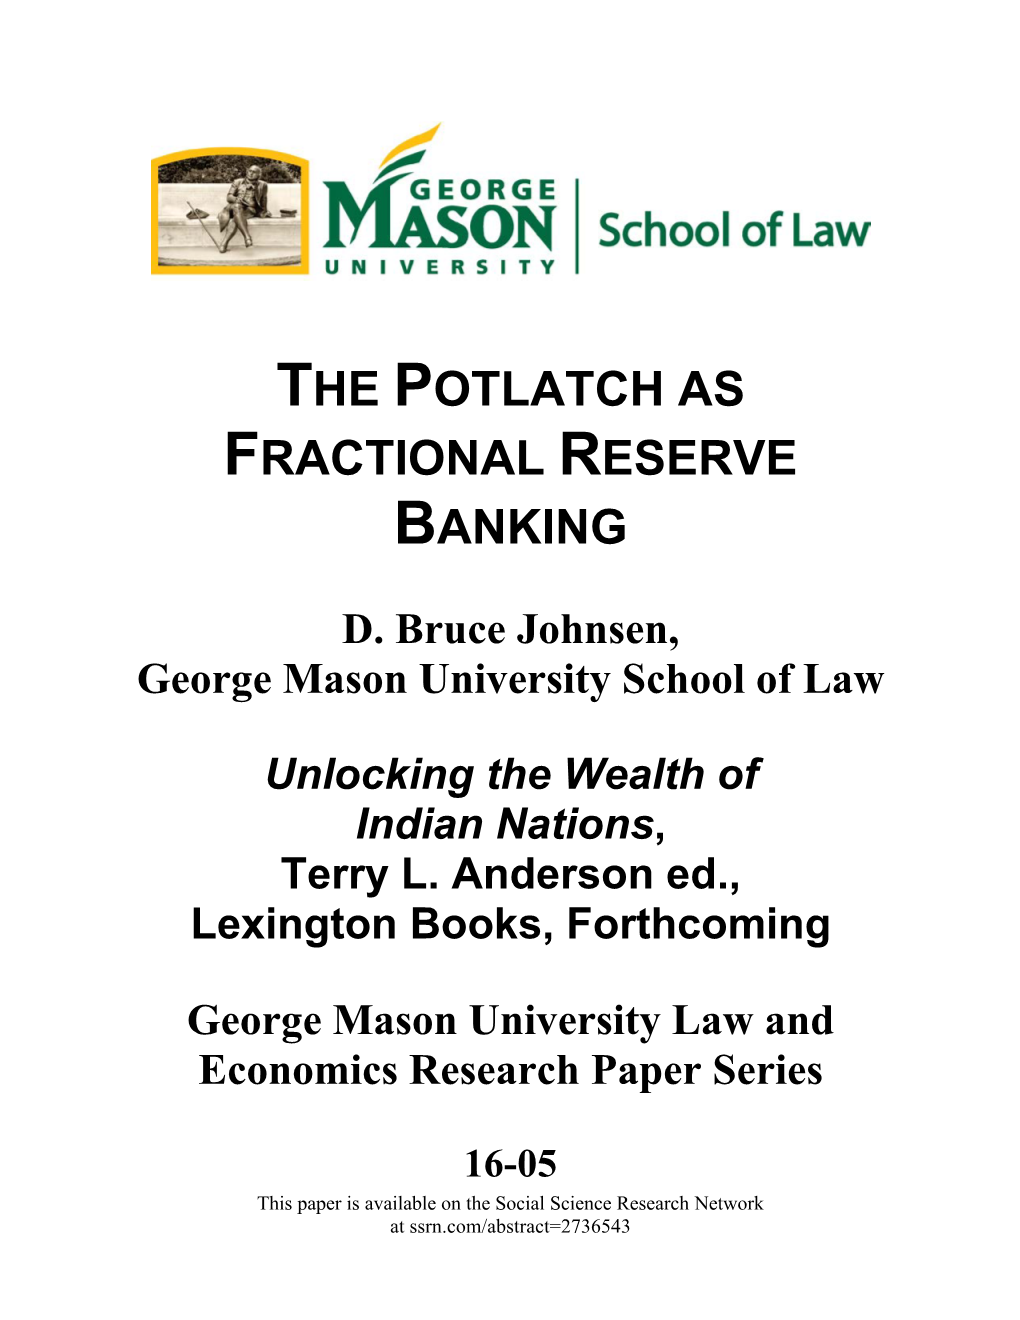 The Potlatch As Fractional Reserve Banking